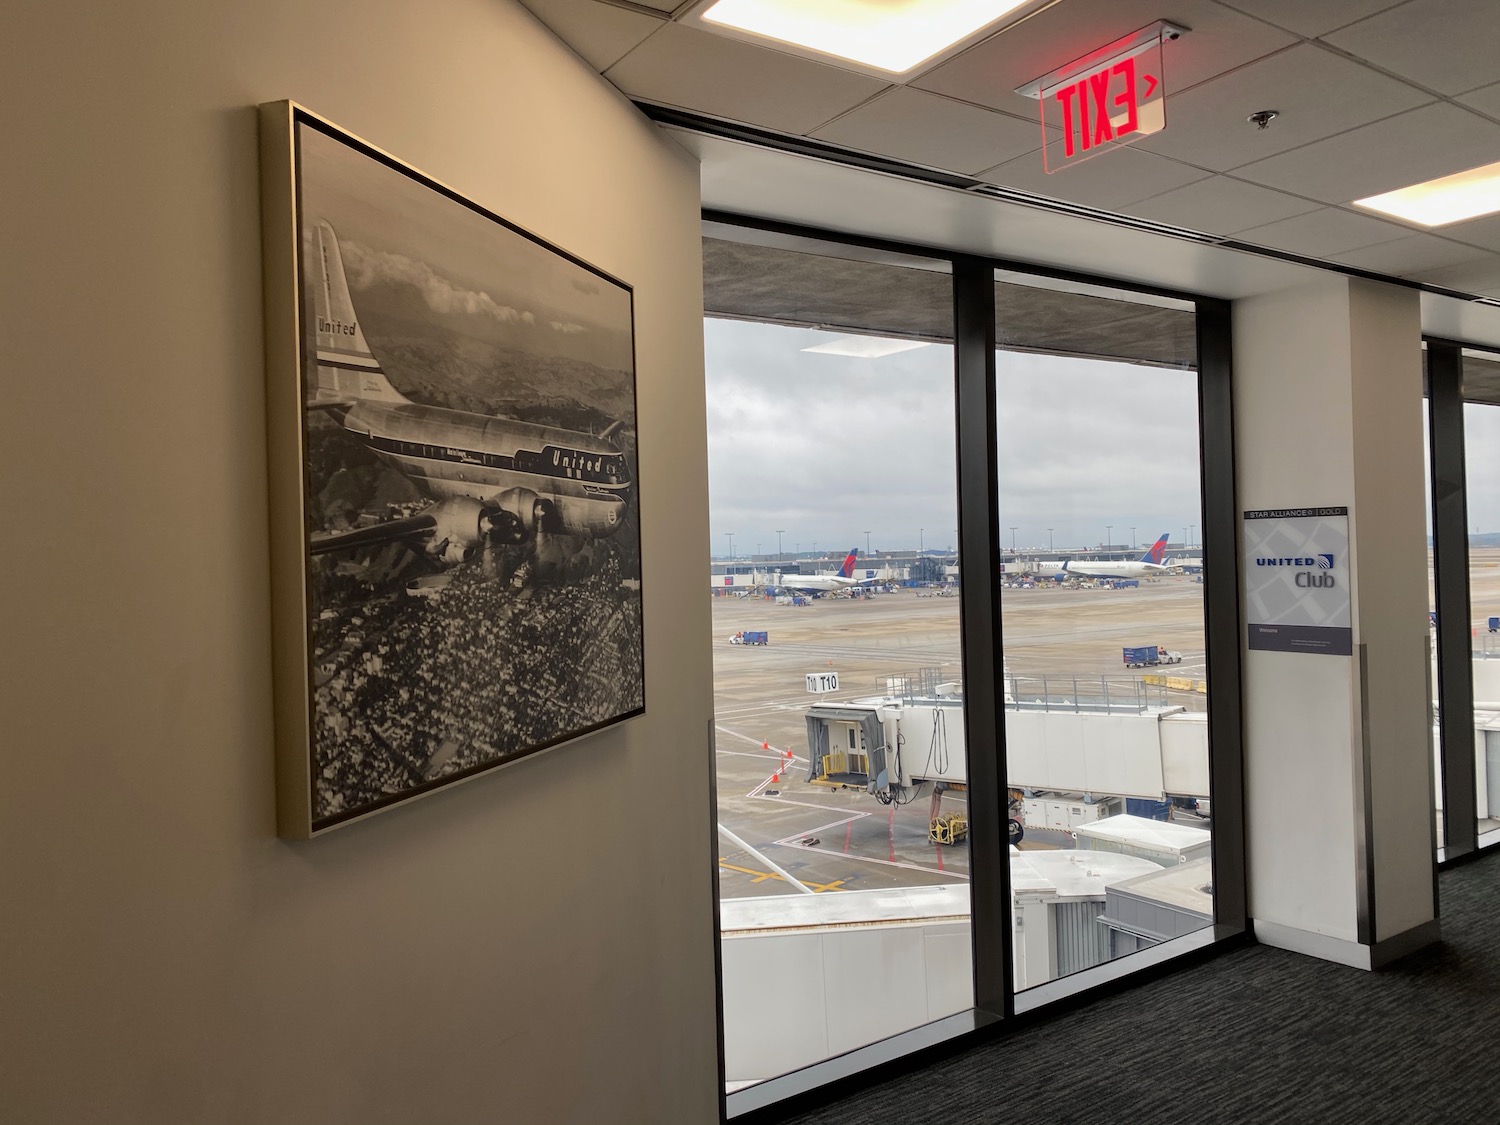 a picture on the wall of an airport